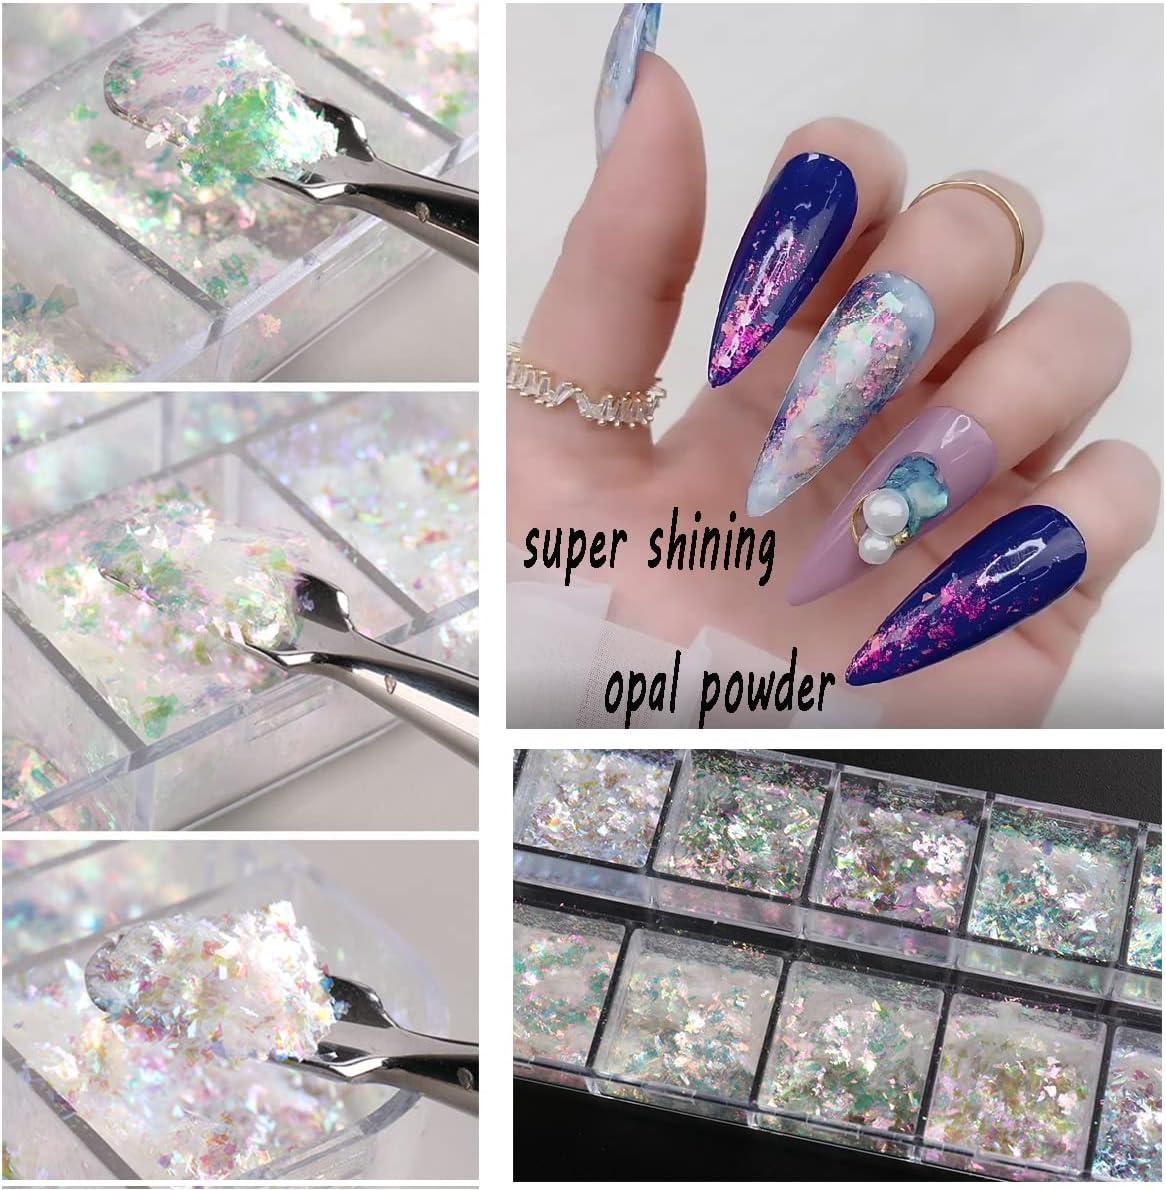 All Types Of Glitter Nails